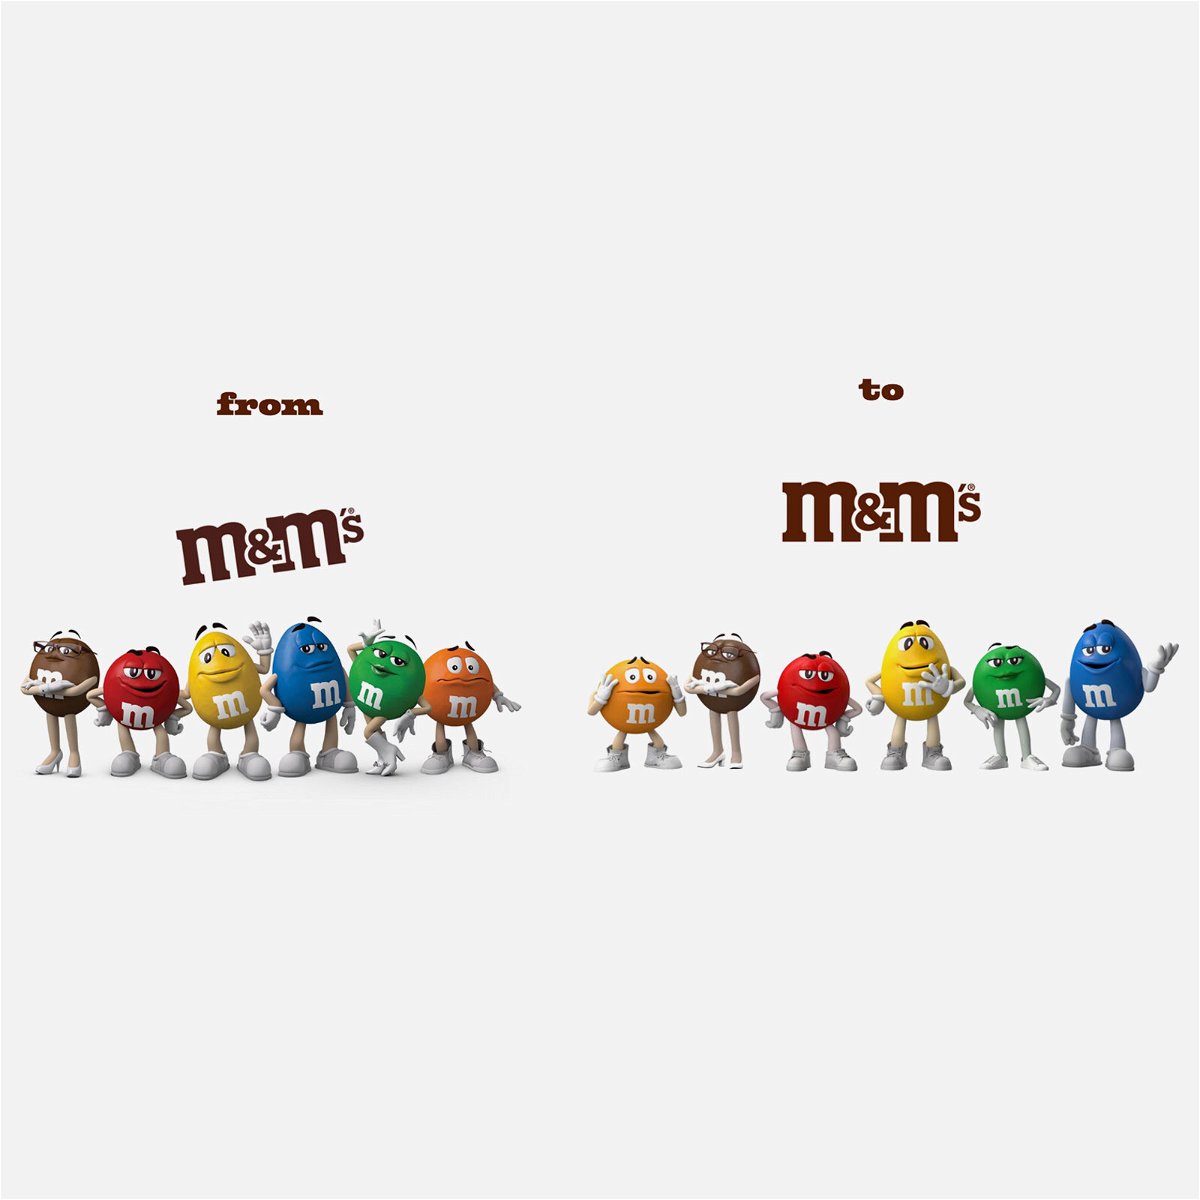 <i>M&Ms</i><br/>M&Ms old logo and characters are shown on the left